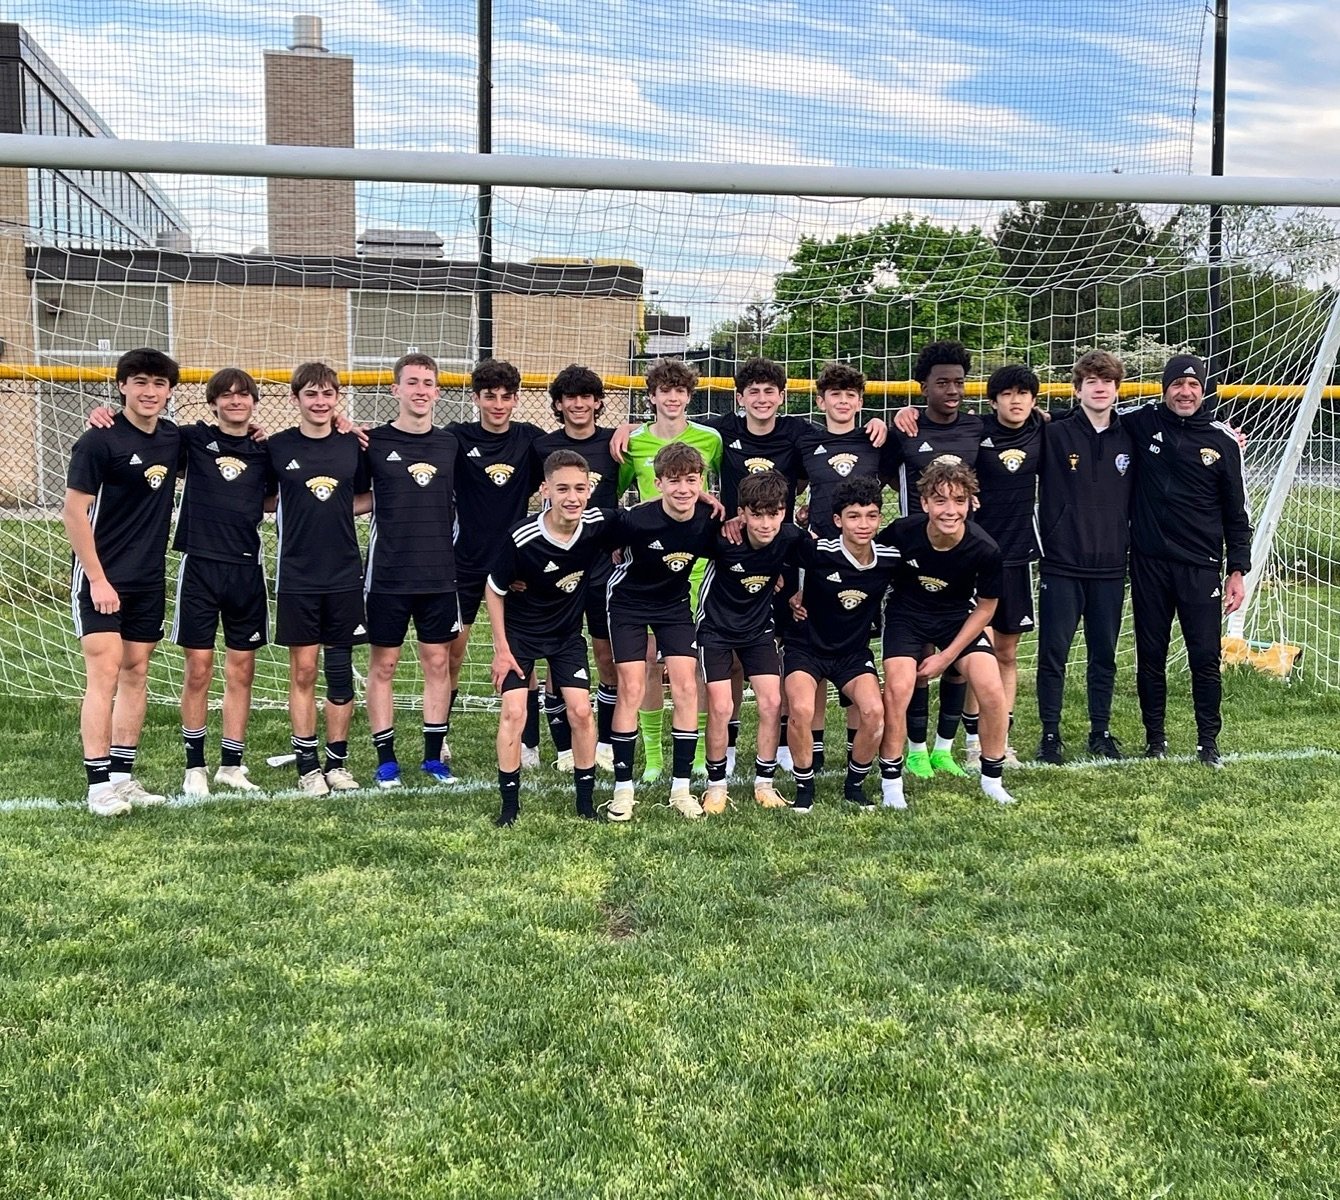 Huge congratulations to the BU15 Commack Pride!! The boys are NYS Open Cup Semifinalists&hellip; made it to the Final Four👍🏻⚽️ They are 4-0-0 in State Cup competition having beaten #16 &amp; 9th ranked teams in the State! Semi&rsquo;s Sunday vs #2 